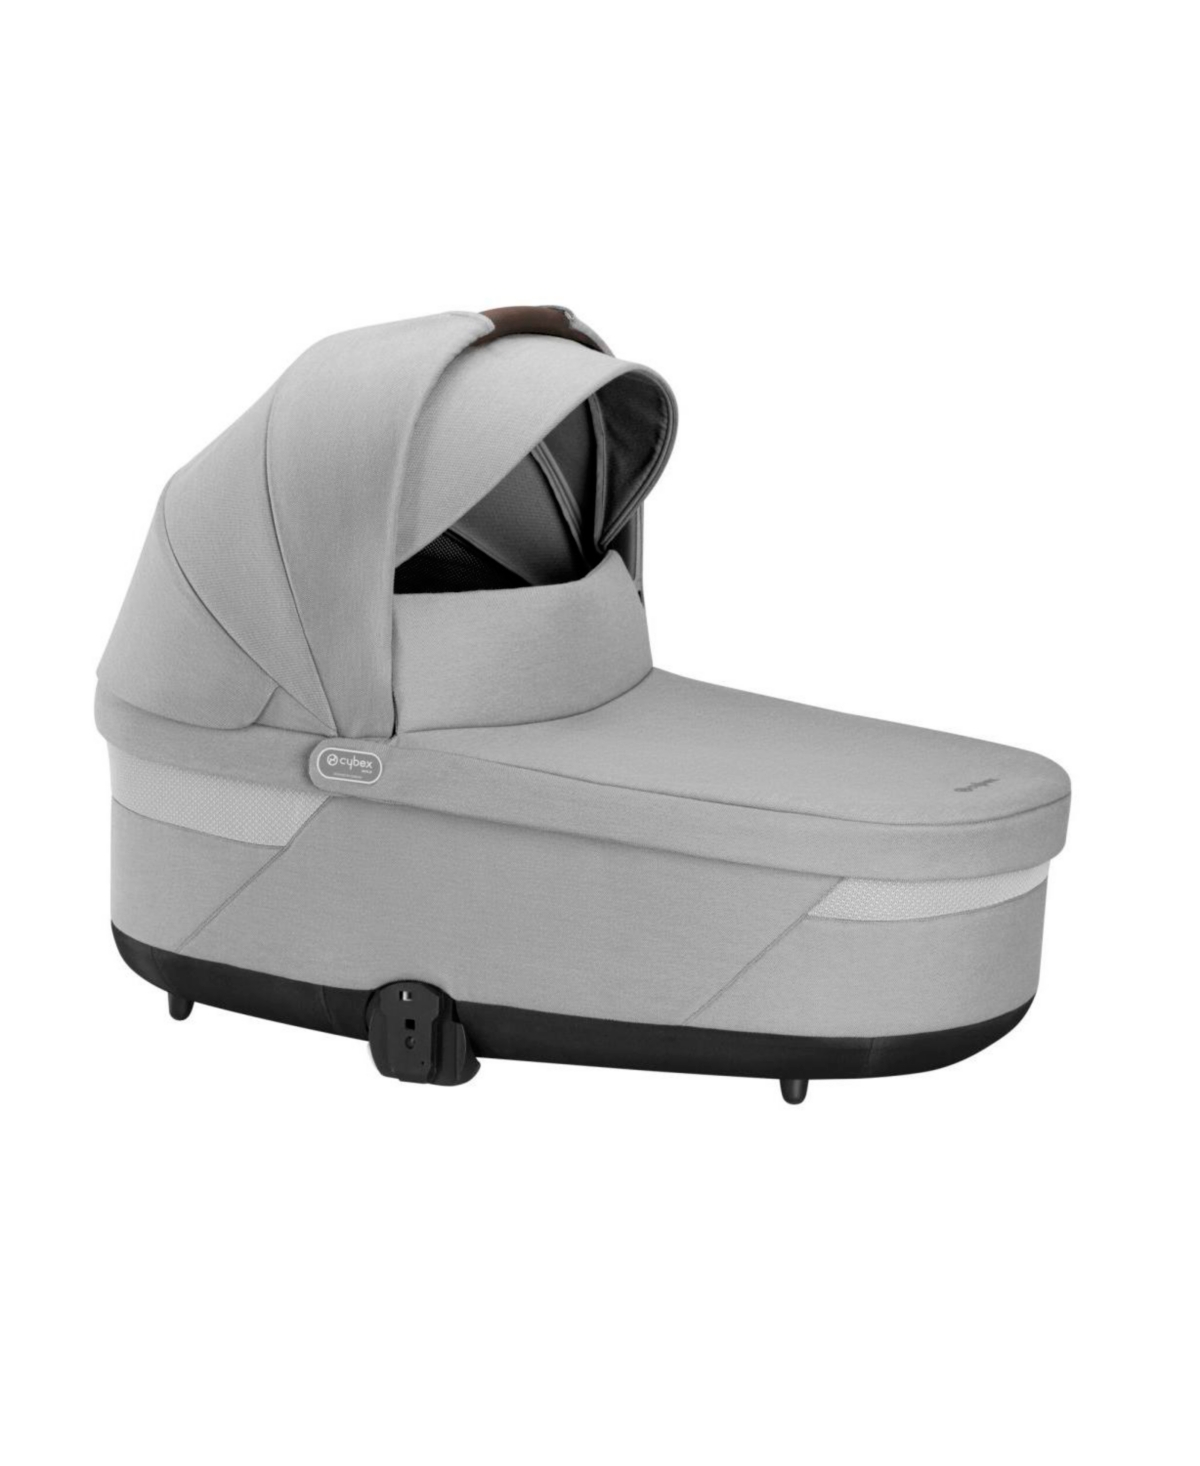 Cybex Cot S Lux 2 Baby Stroller In Lava Gray